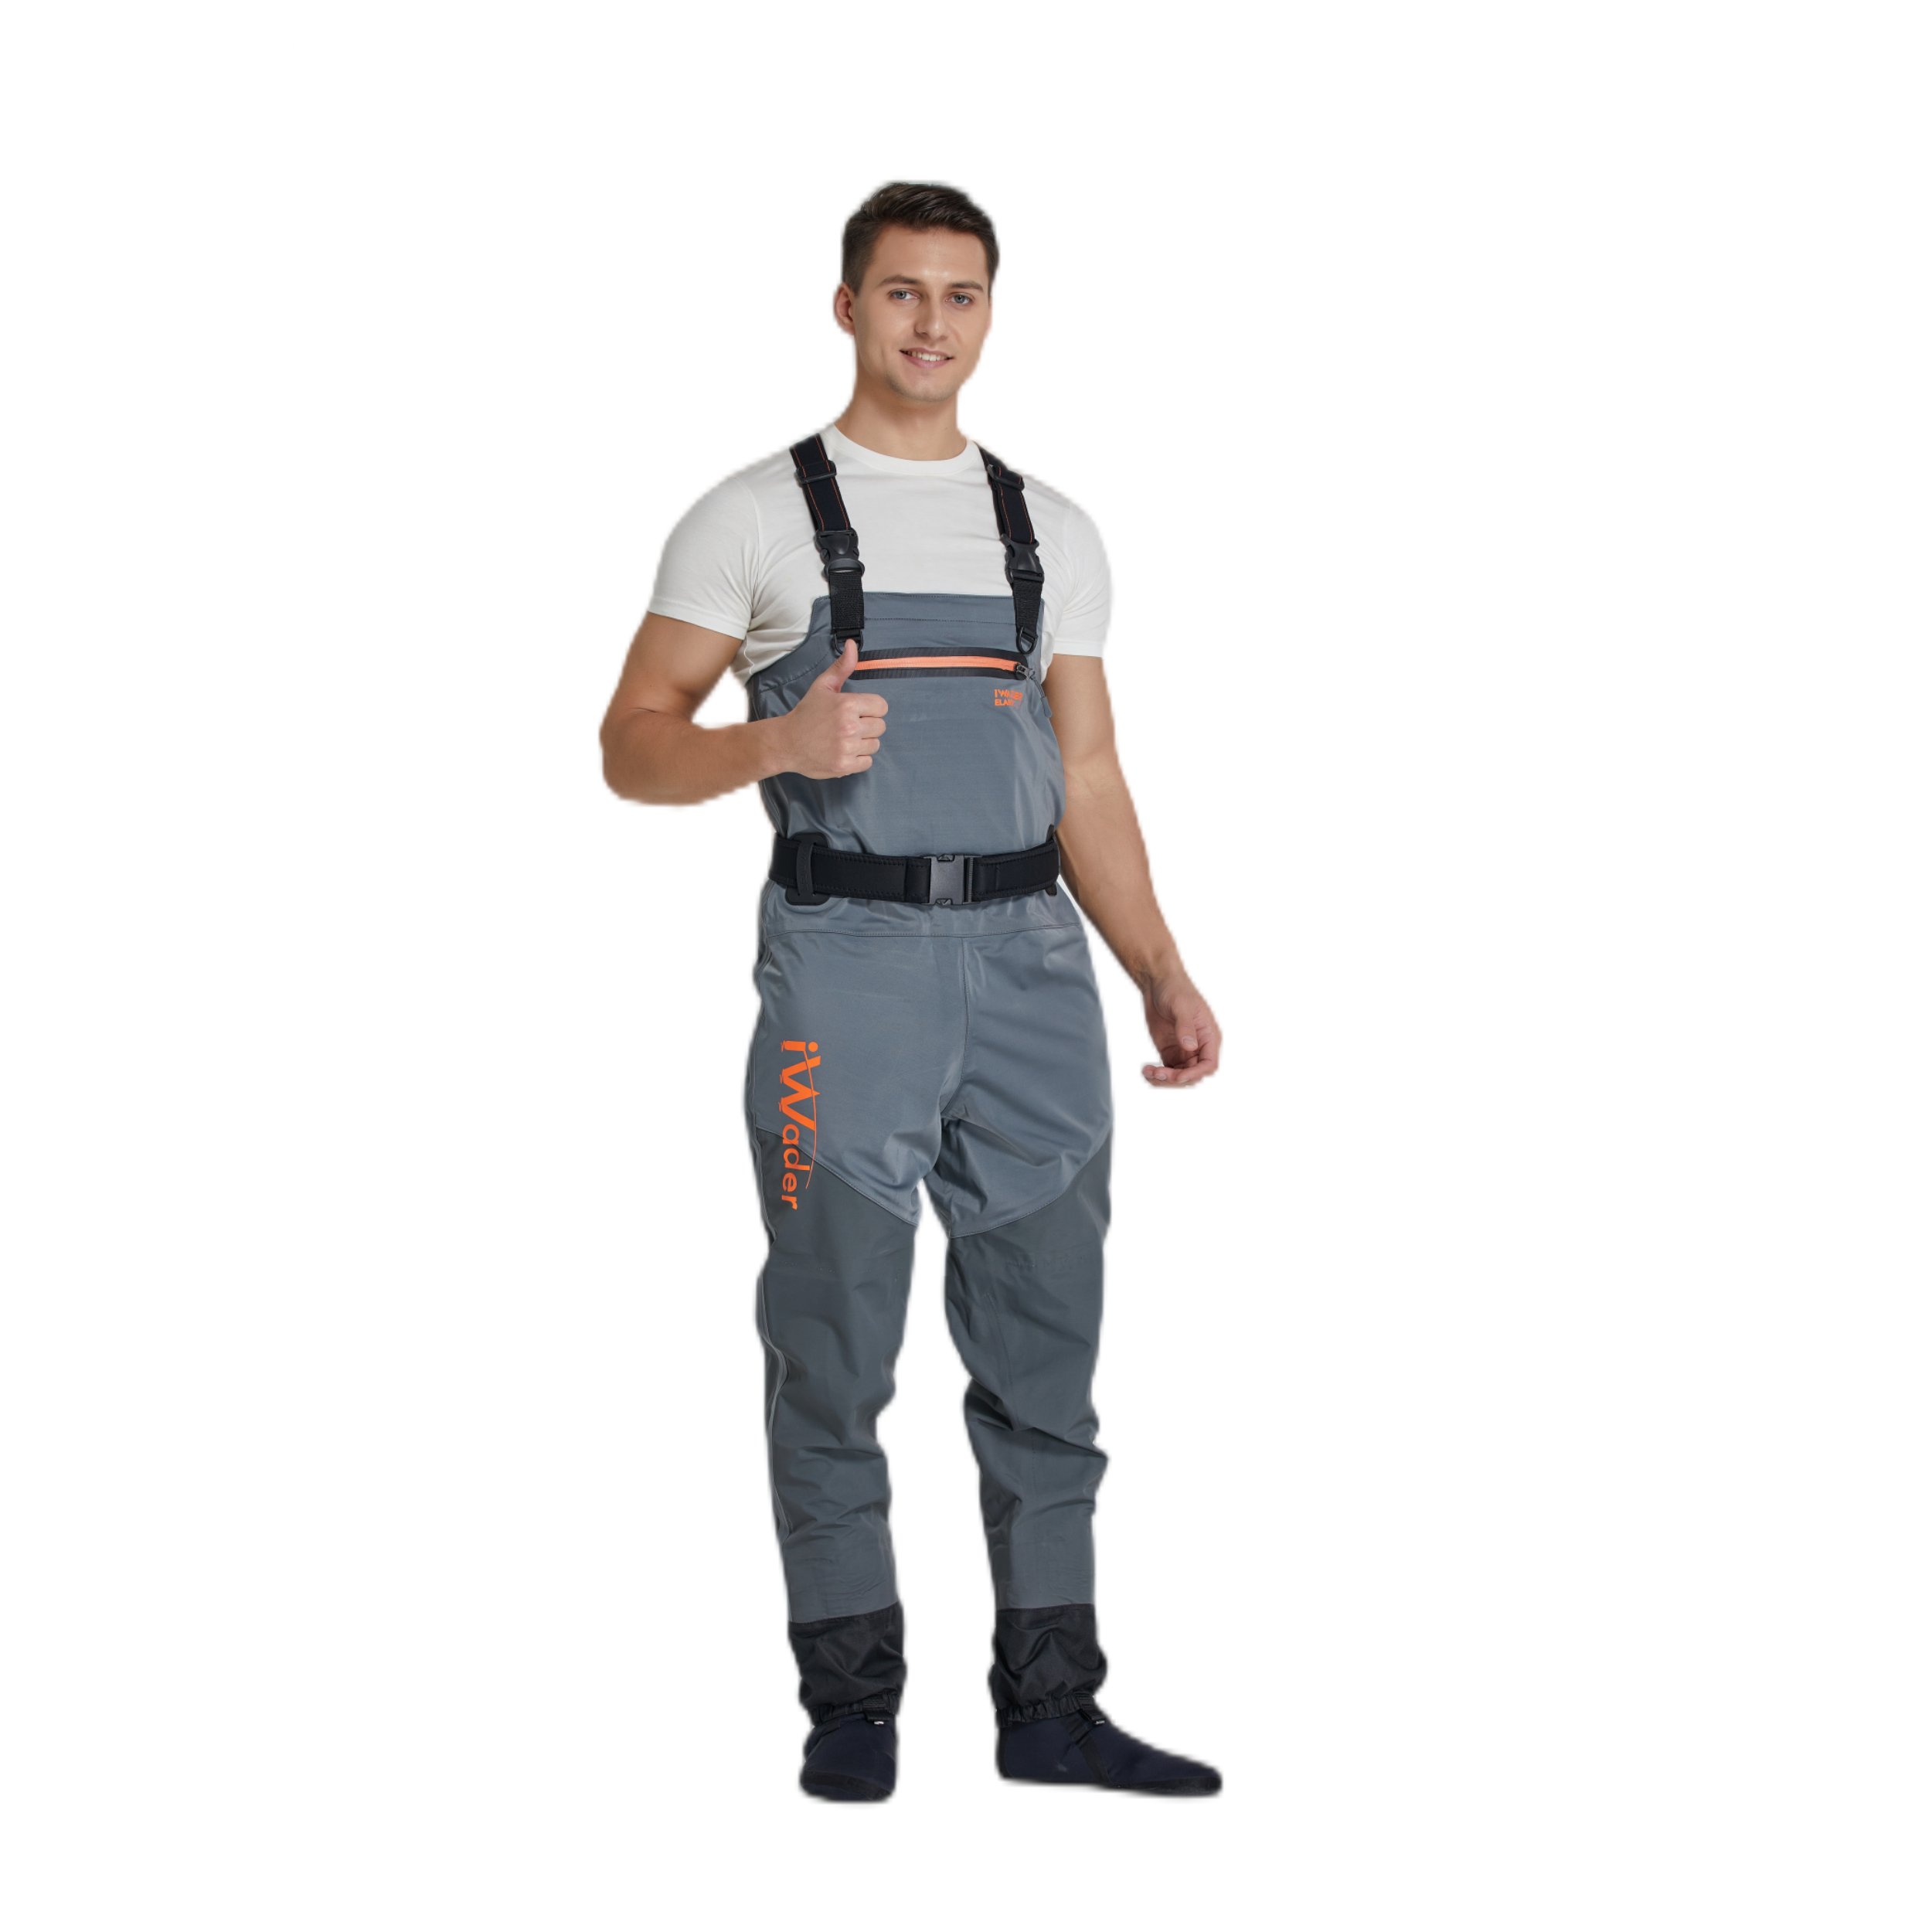 D2 Custom Chest Waders - Breathable & Stockingfoot – iWader